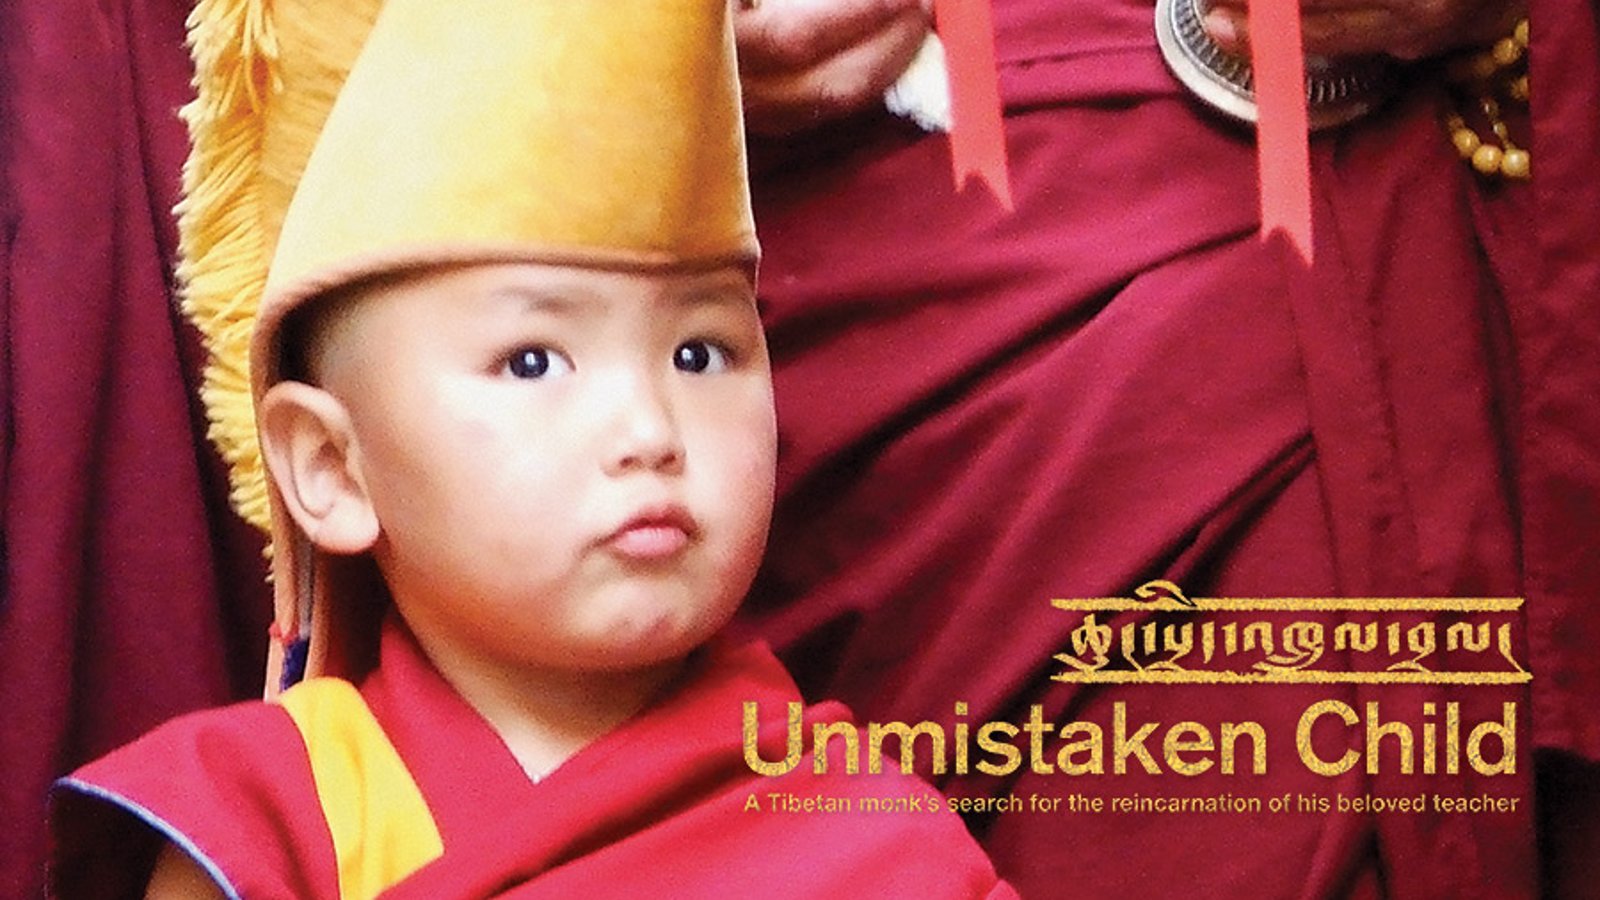 Unmistaken Child - The Search for the Reincarnation of a Tibetan Master